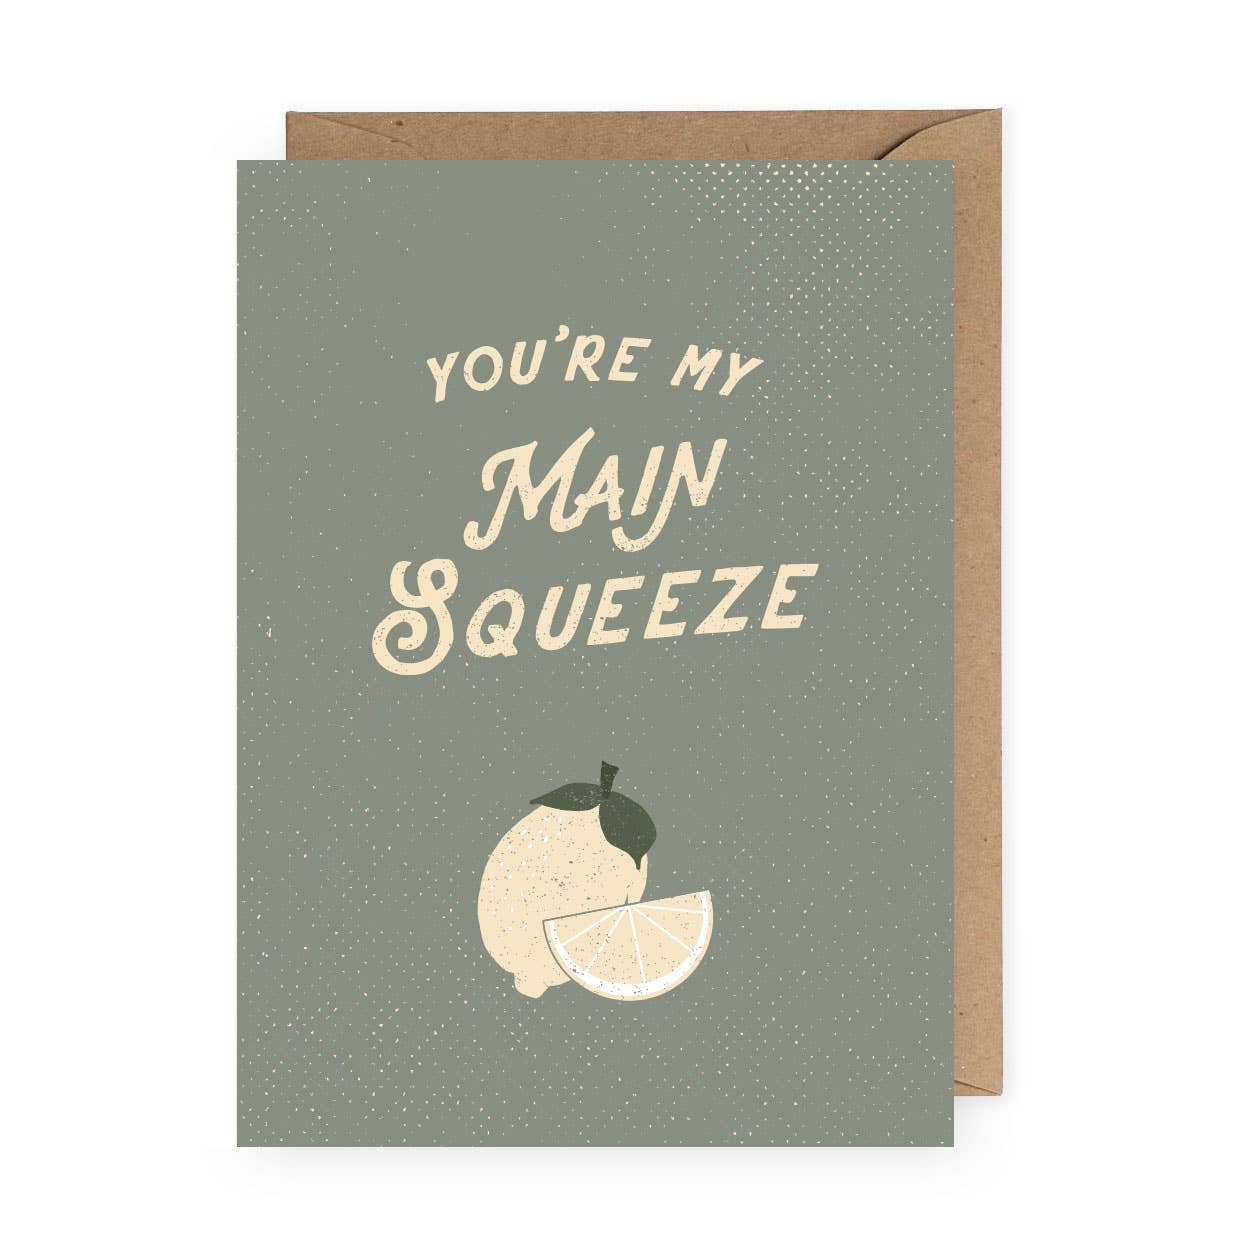 You're my Main Squeeze Greeting Card: Rust